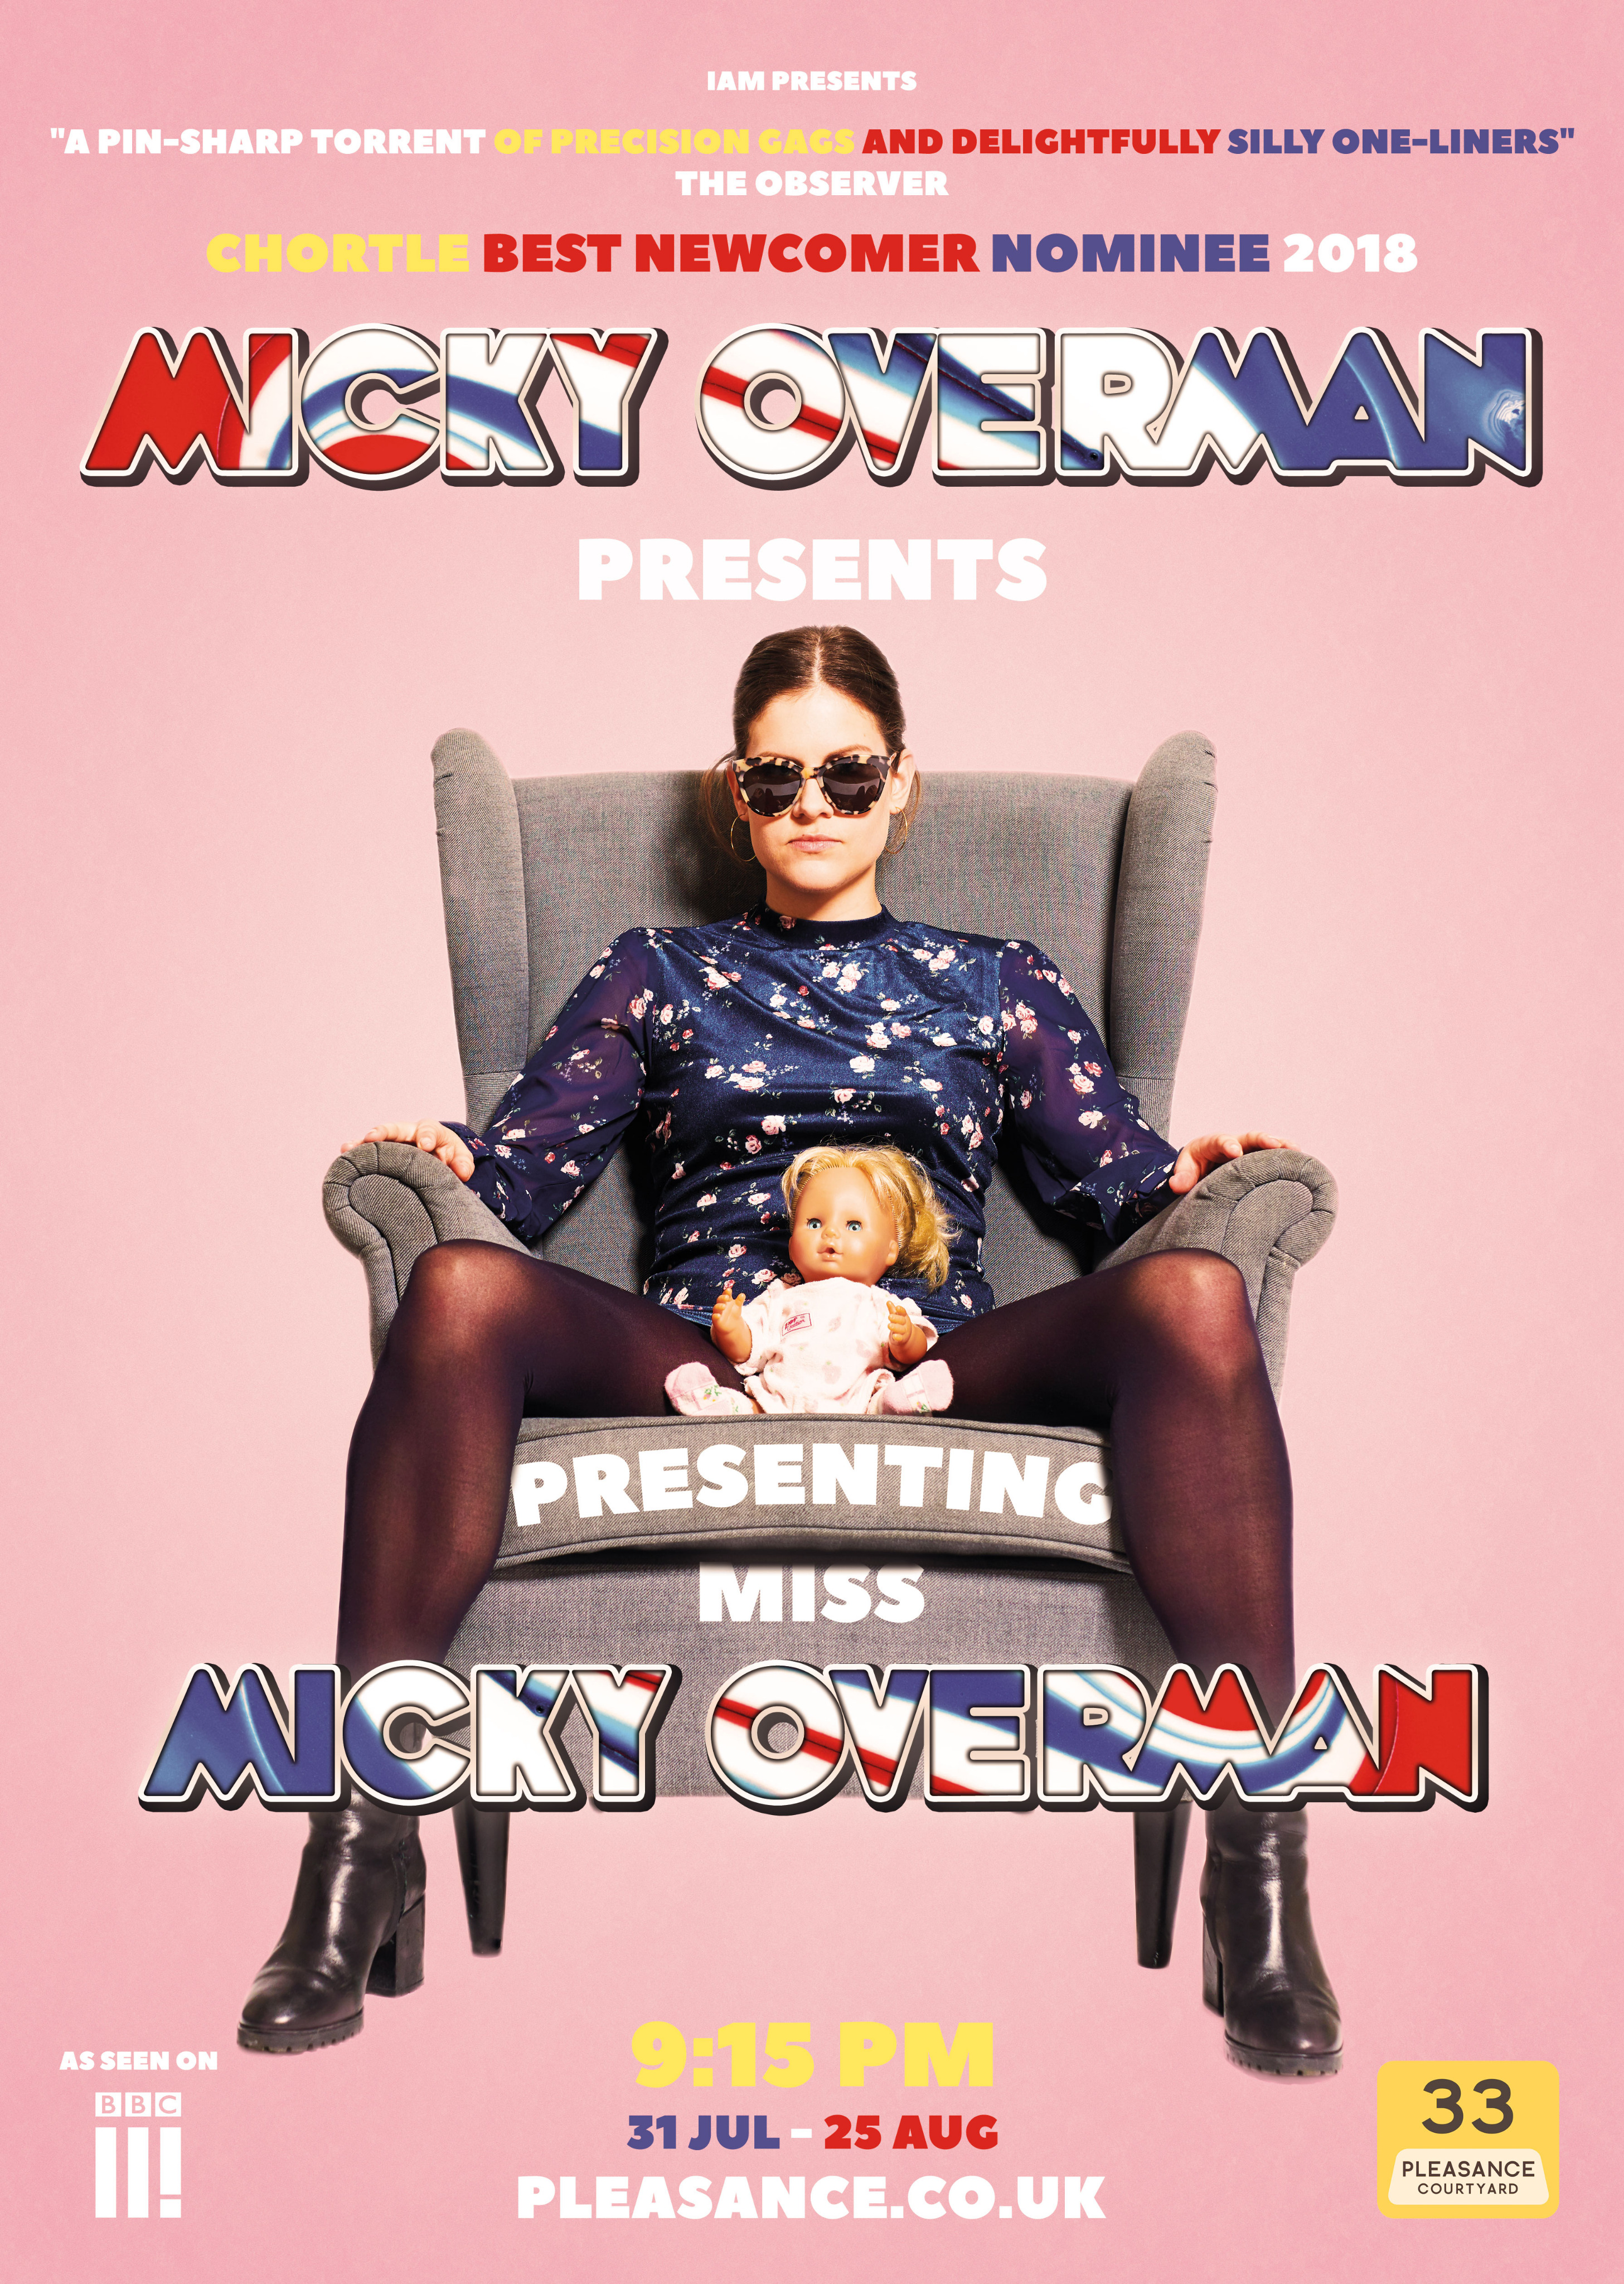 The poster for Micky Overman Presents: Presenting Miss Micky Overman